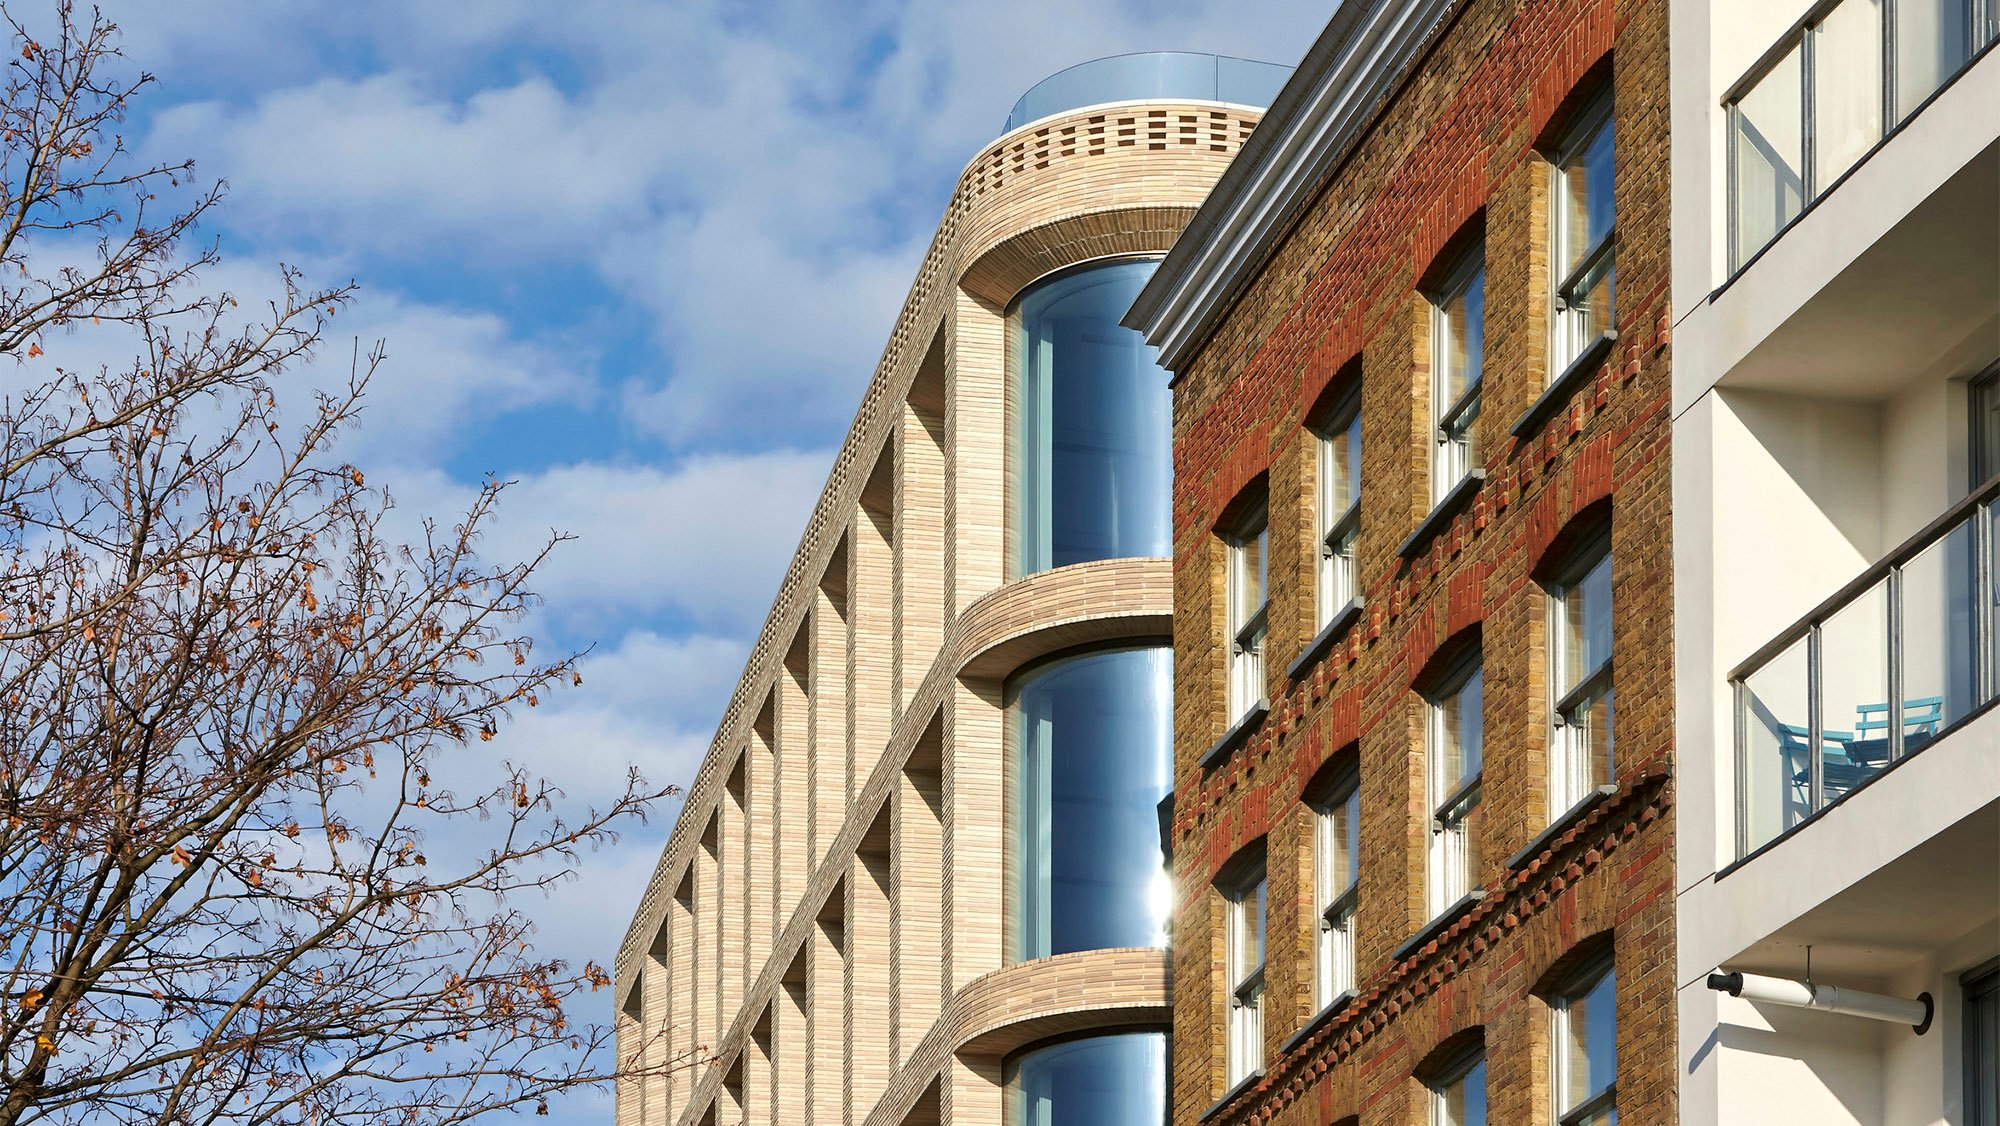 The exterior of the new 6 storey brick-lad Turnmill commercial building in Clerkenwell, London. Photo: Hufton and Crow